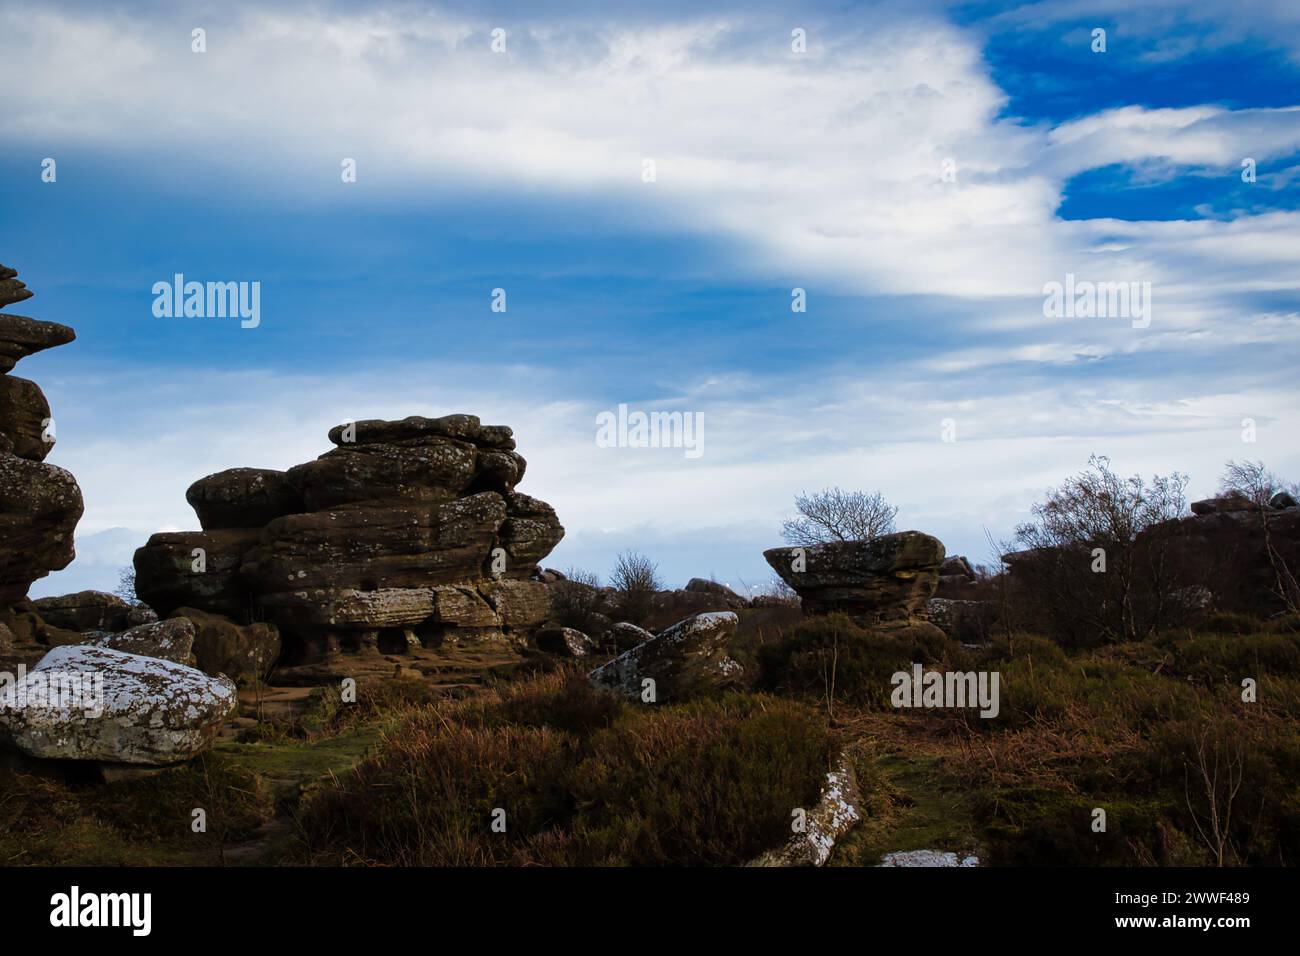 Scenic view of rugged rock formations amidst wild heath under a cloudy sky at Brimham Rocks, in North Yorkshire Stock Photo